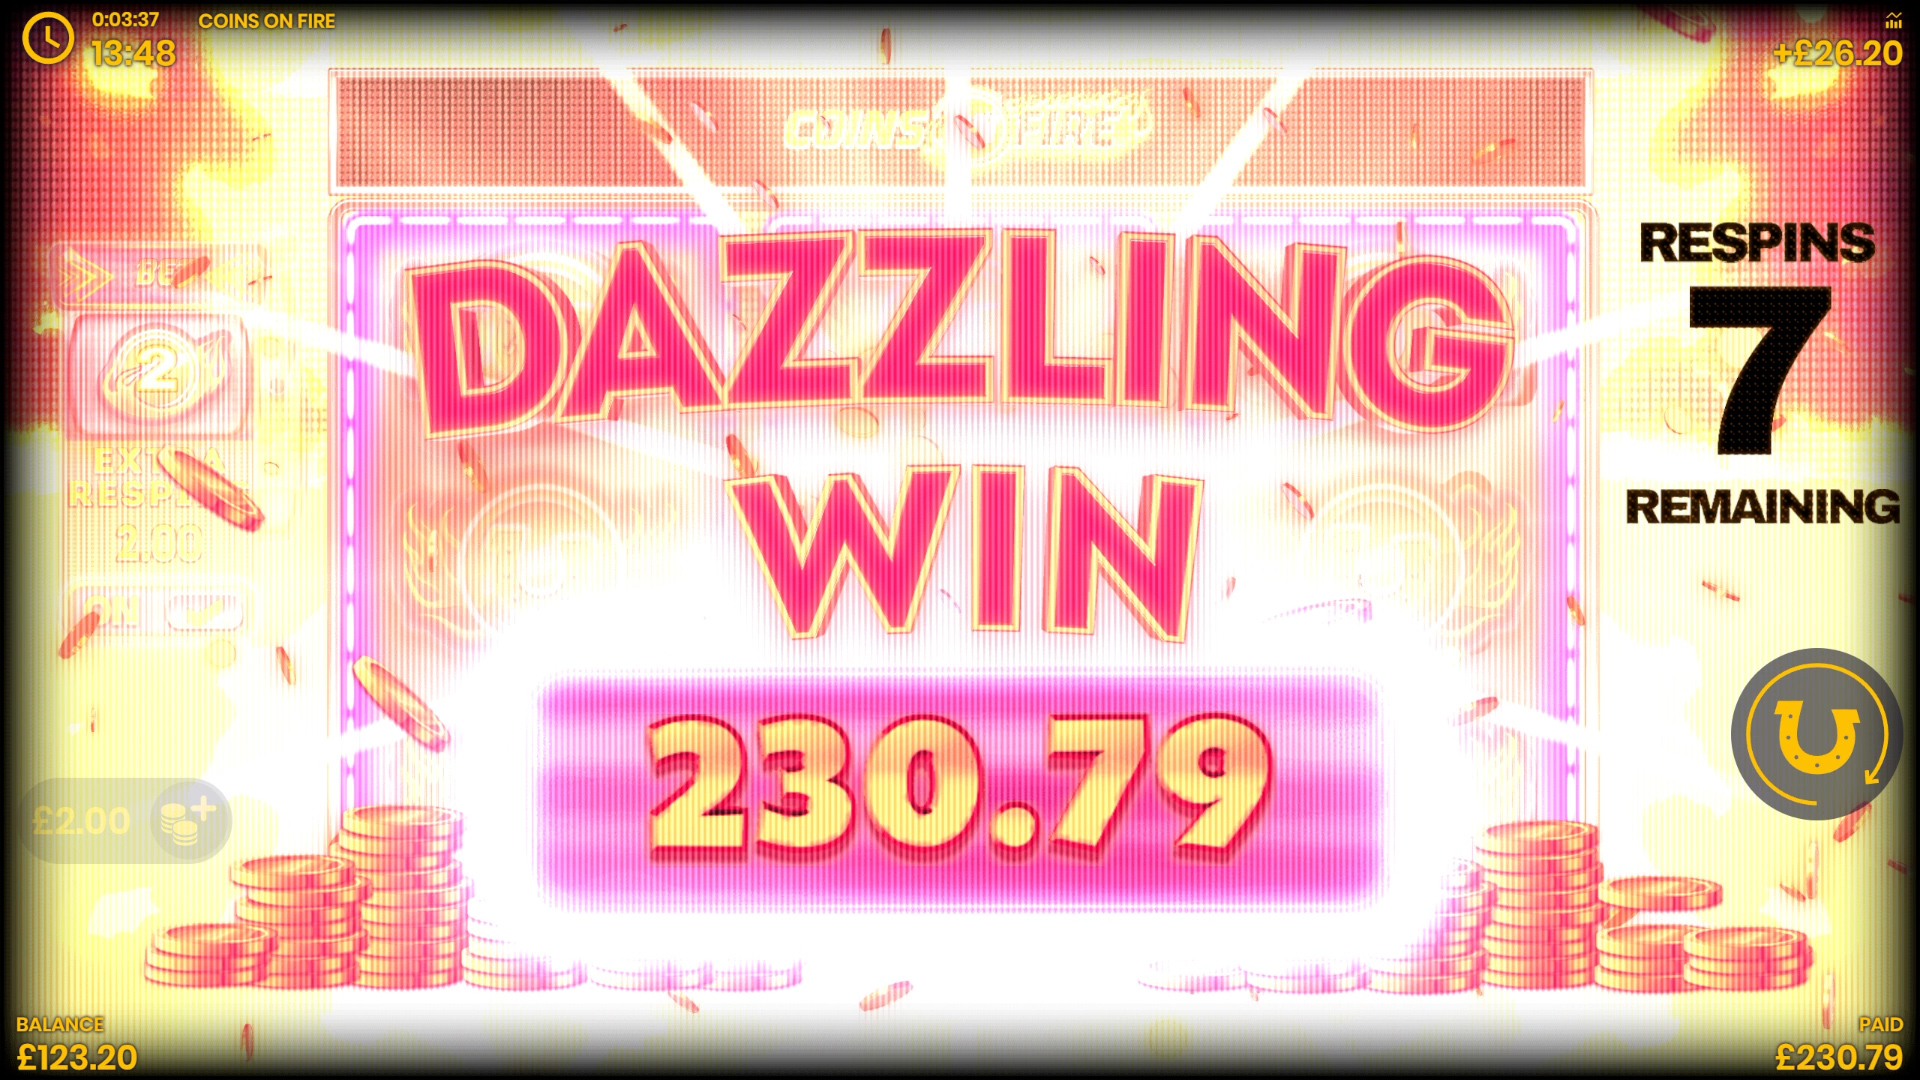 Coins on fire slot dazzling win